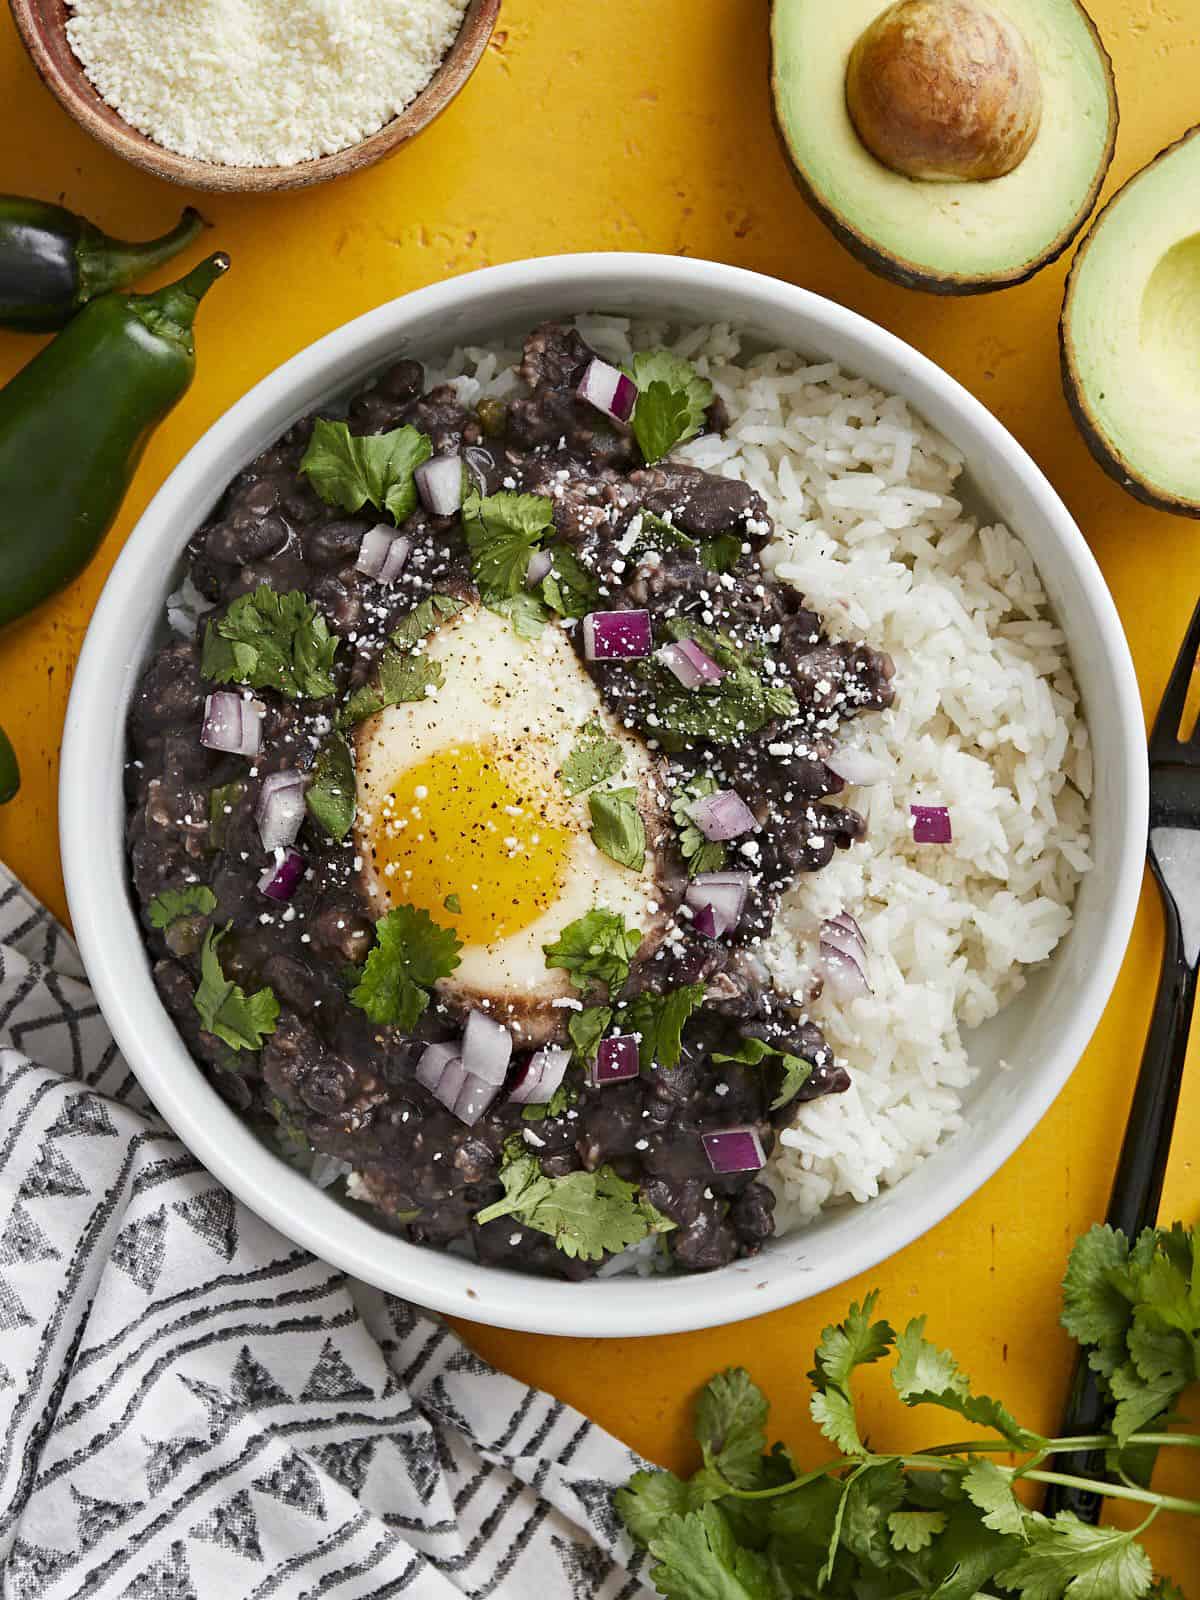 Overhead view of a bowl full of rice, black beans and eggs garnished with onion and cilantro.